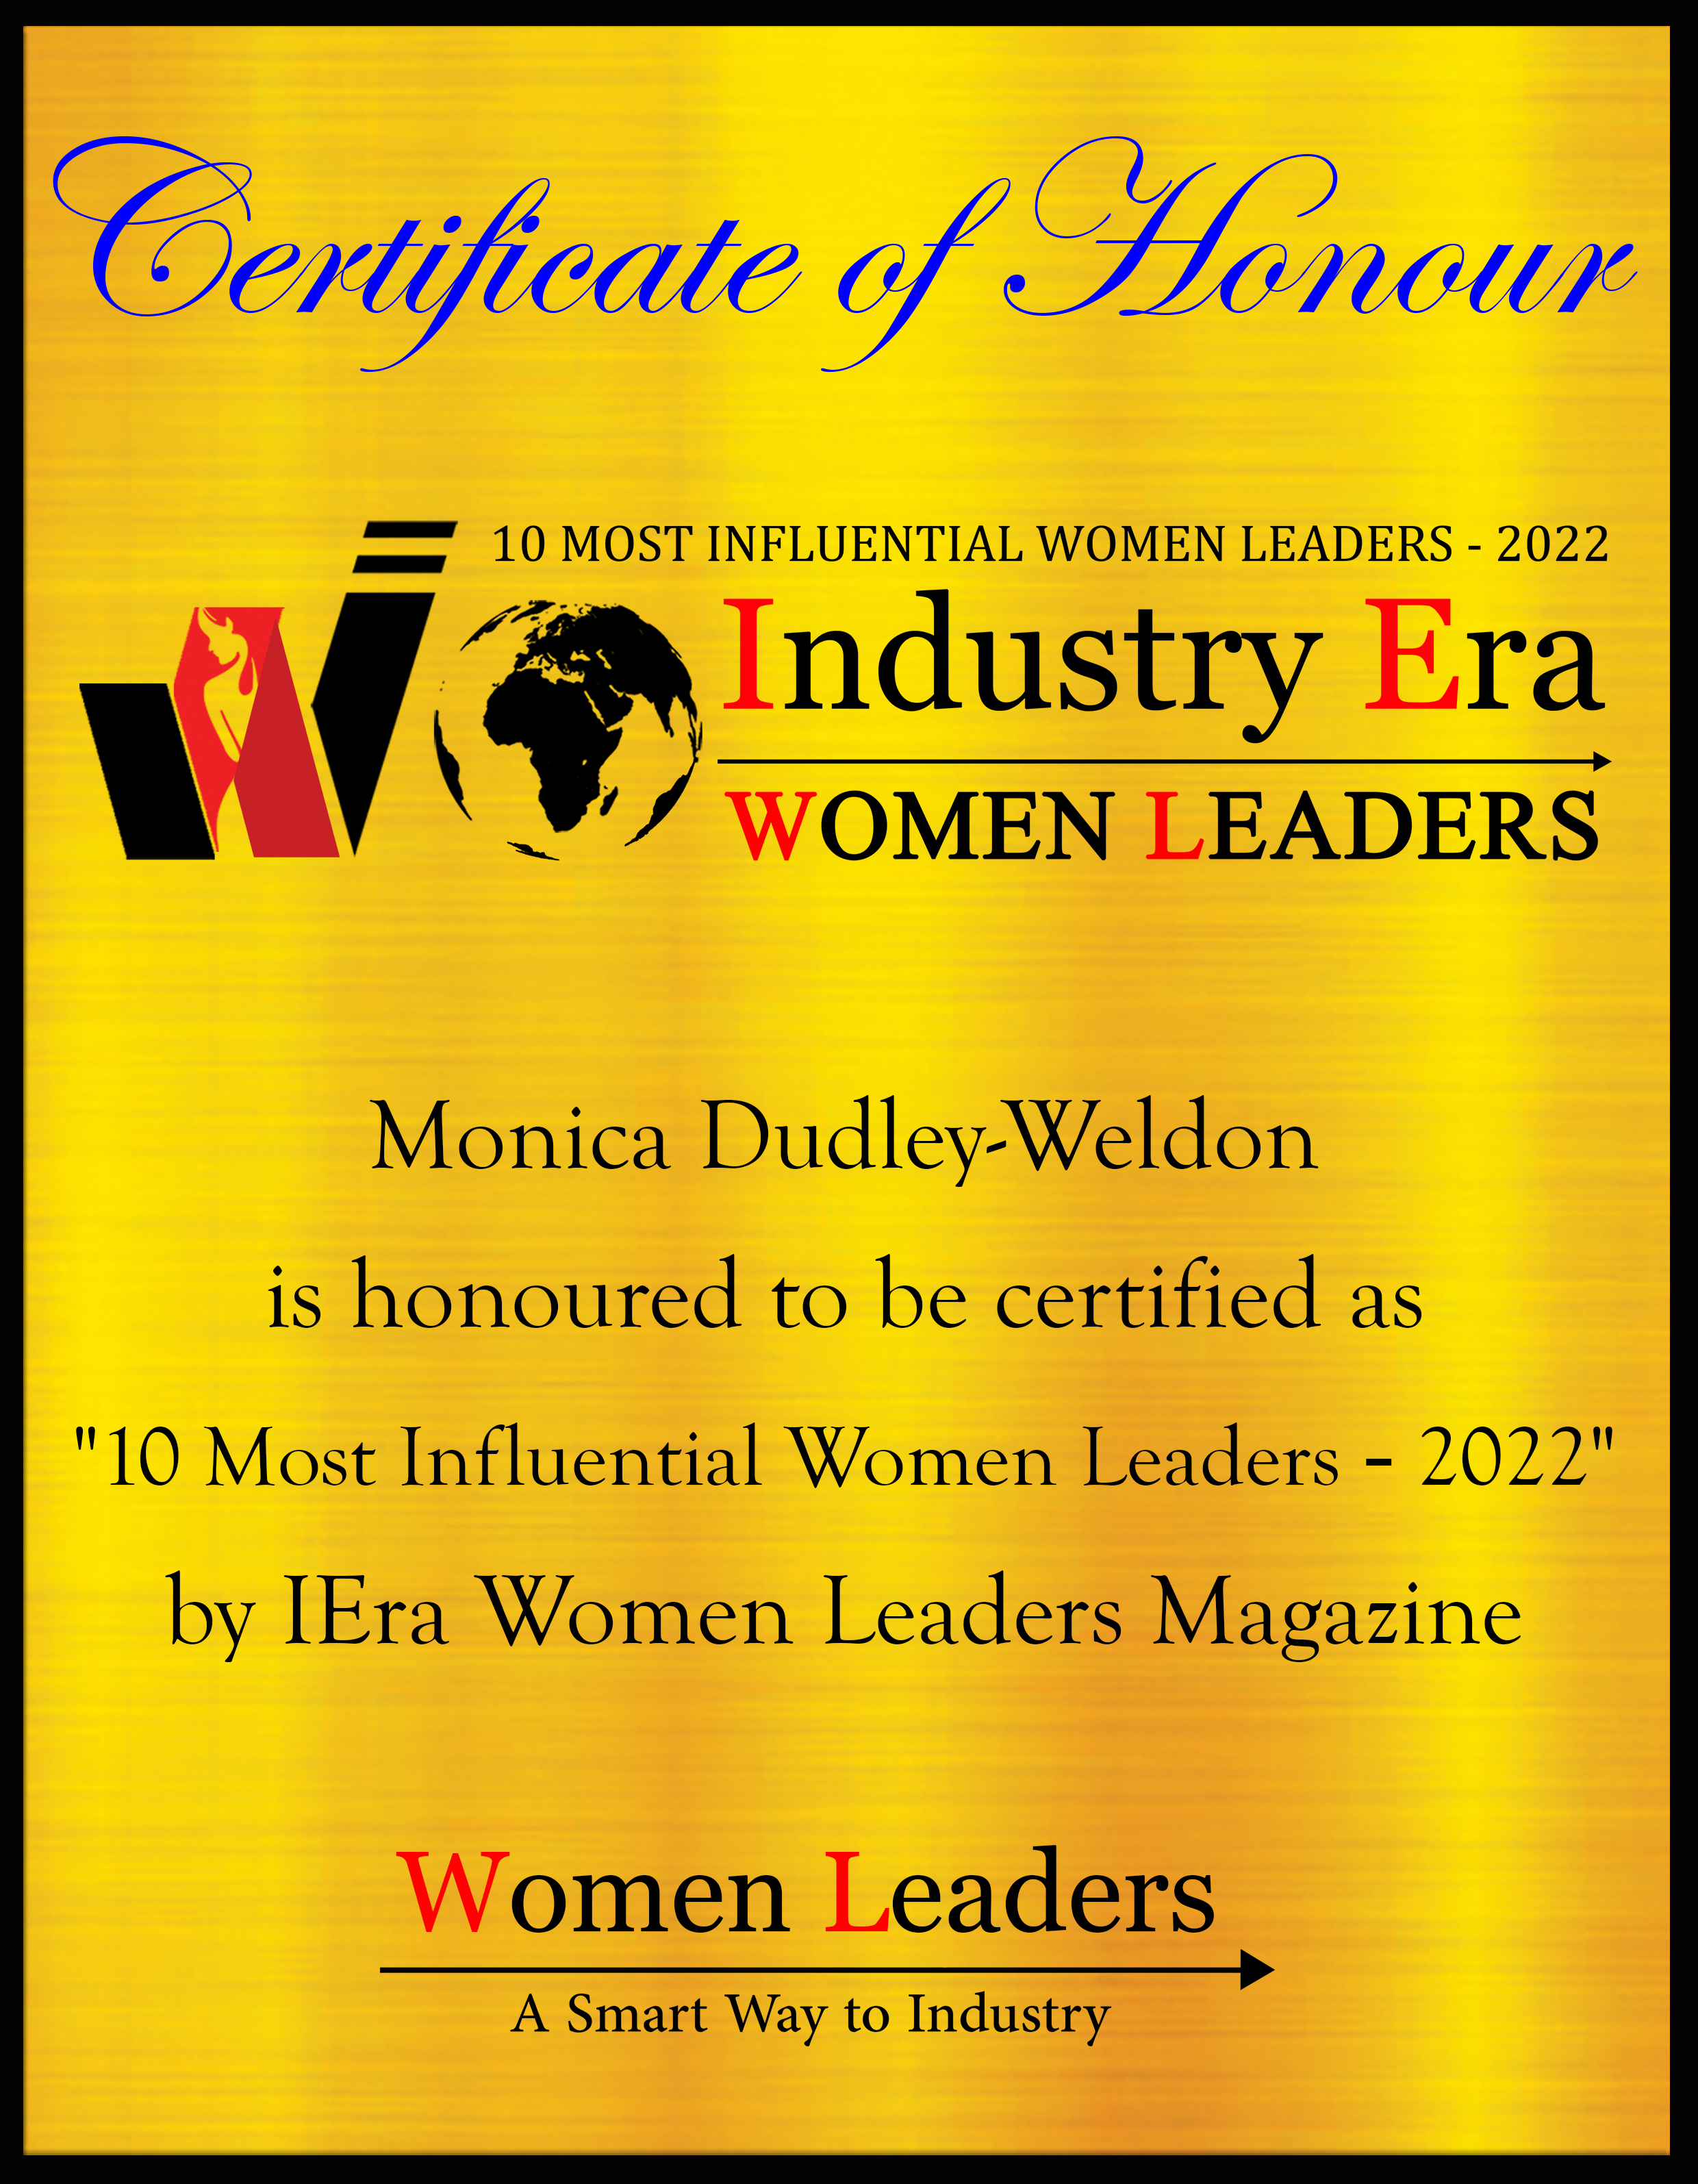 Monica Dudley-Weldon, President, CEO & Founder of SYNGAP1 Foundation, 10 Most Influential Women Leaders of 2022